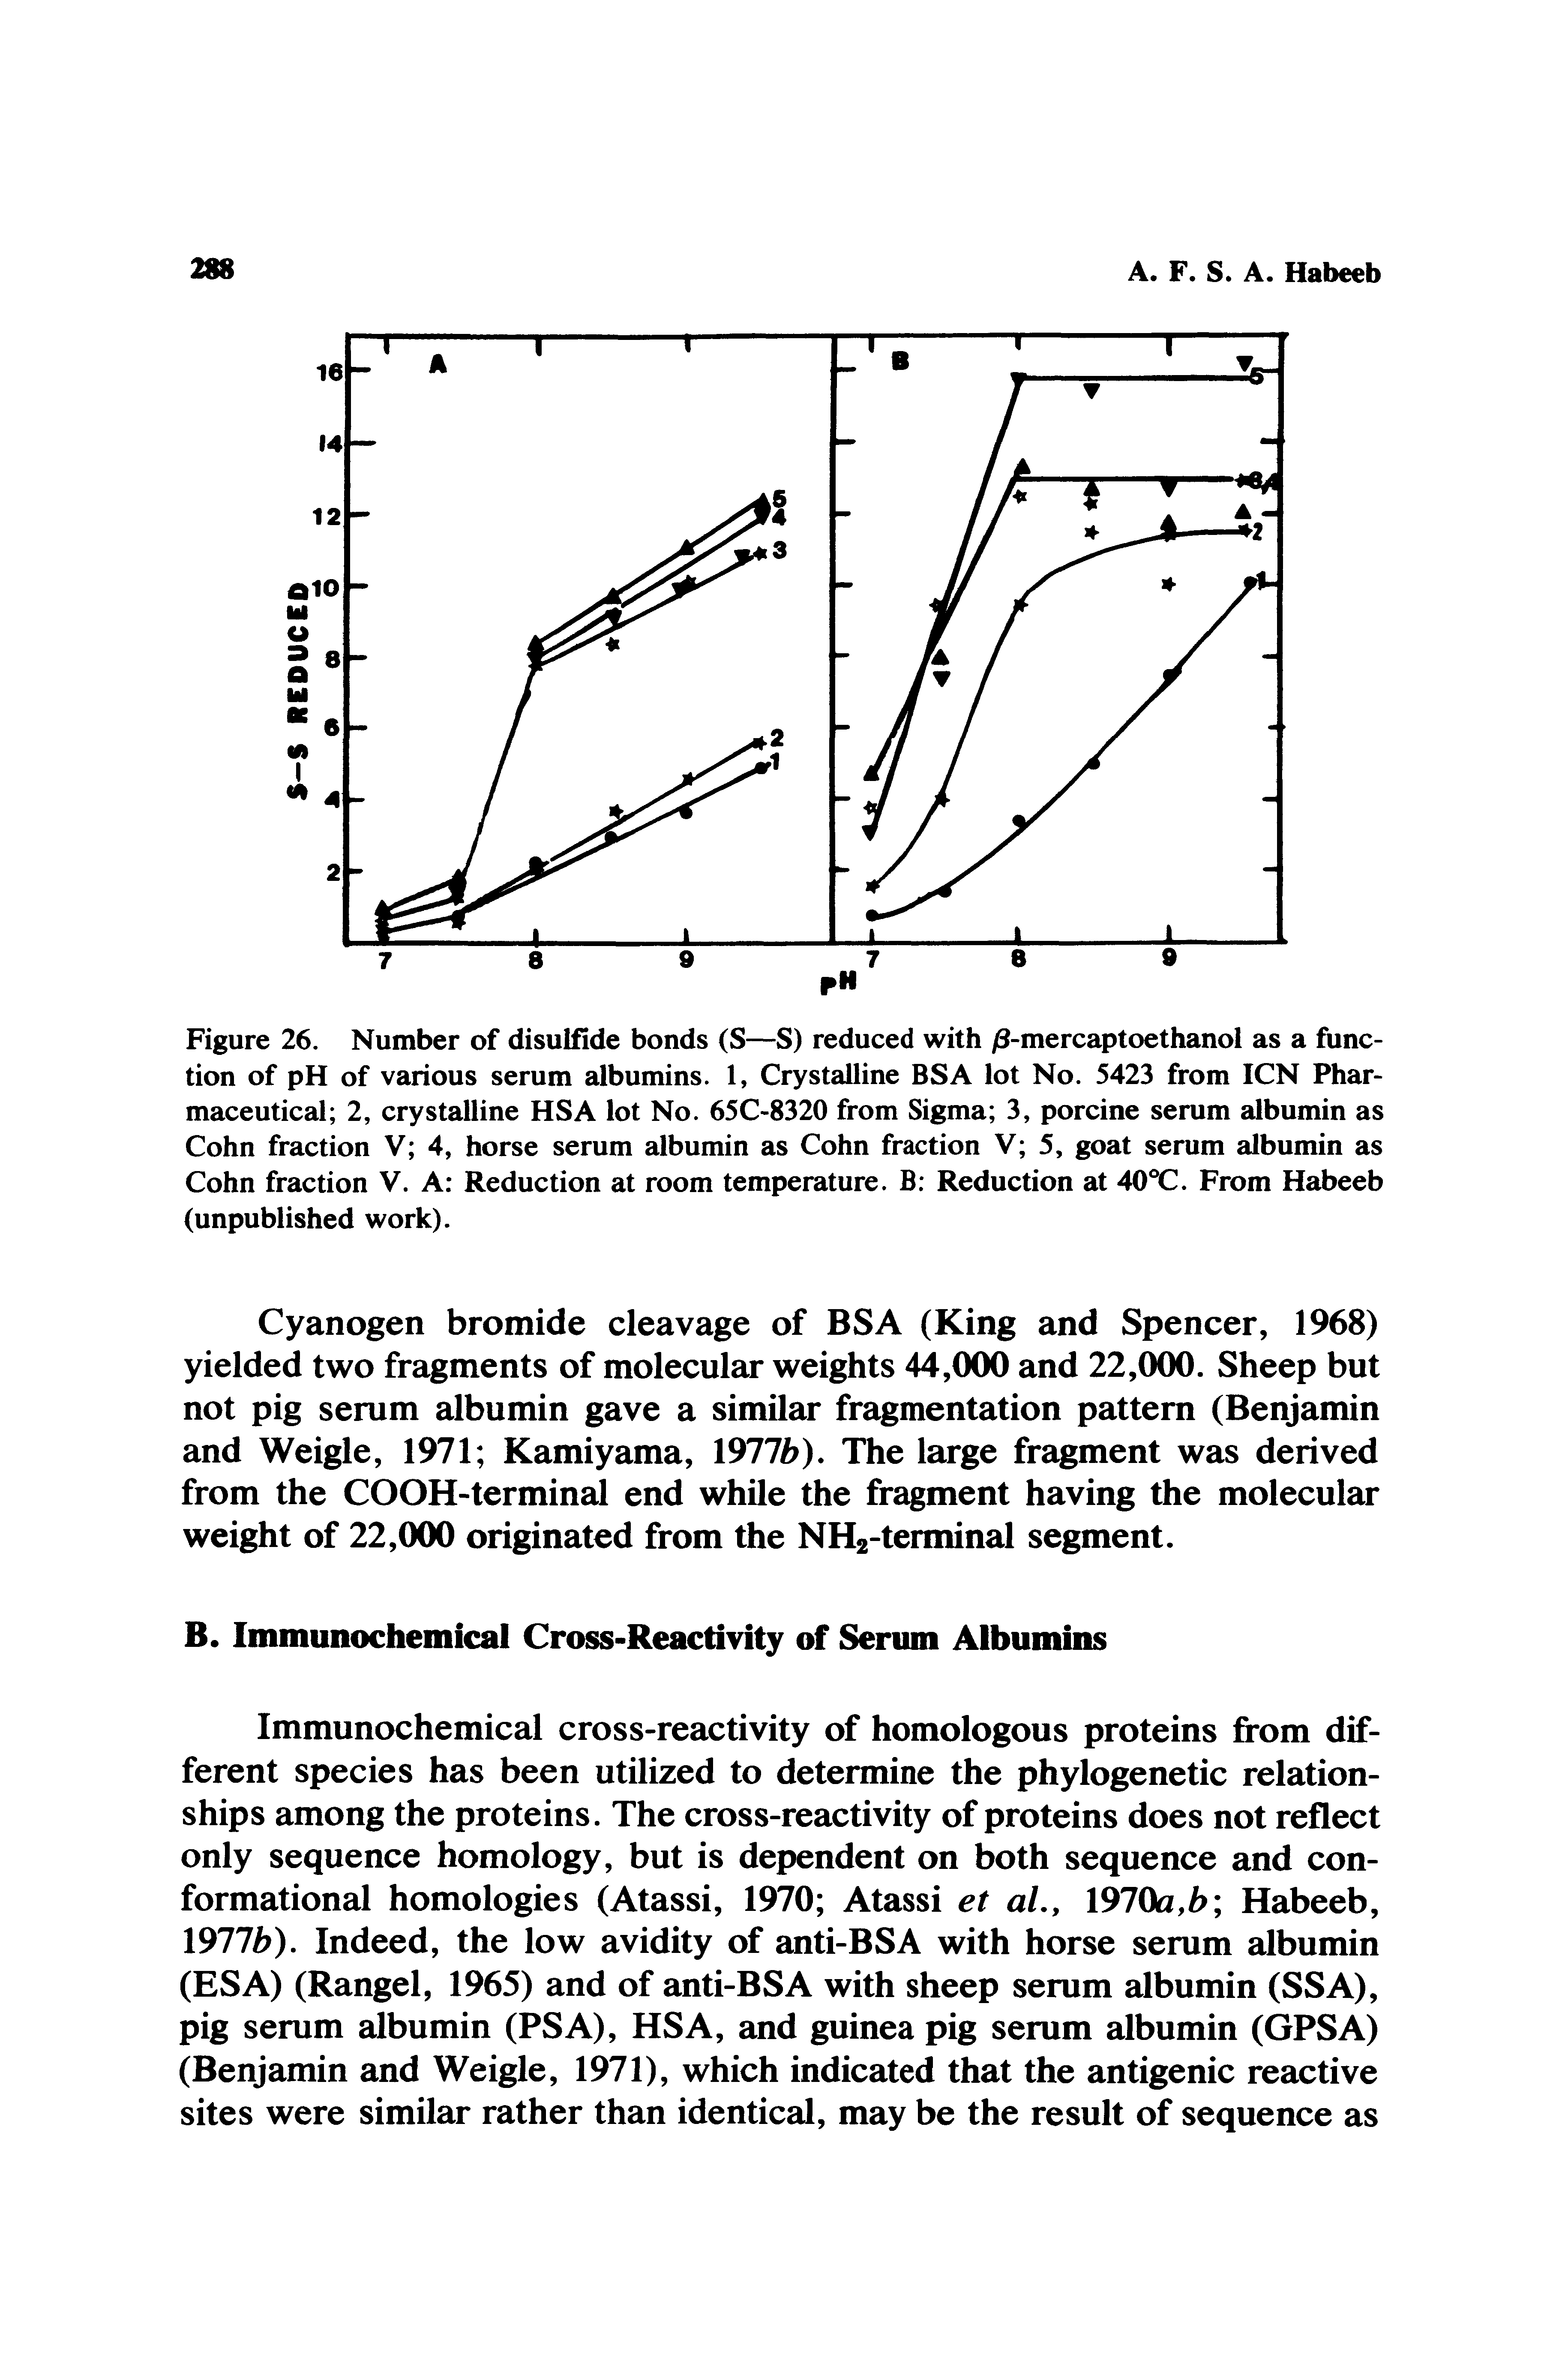 Figure 26. Number of disulfide bonds (S—S) reduced with /3-mercaptoethanol as a function of pH of various serum albumins. 1, Crystalline BSA lot No. 5423 from ICN Pharmaceutical 2, crystalline HSA lot No. 65C-8320 from Sigma 3, porcine serum albumin as Cohn fraction V 4, horse serum albumin as Cohn fraction V 5, goat serum albumin as Cohn fraction V. A Reduction at room temperature. B Reduction at 40 C. From Habeeb (unpublished work).